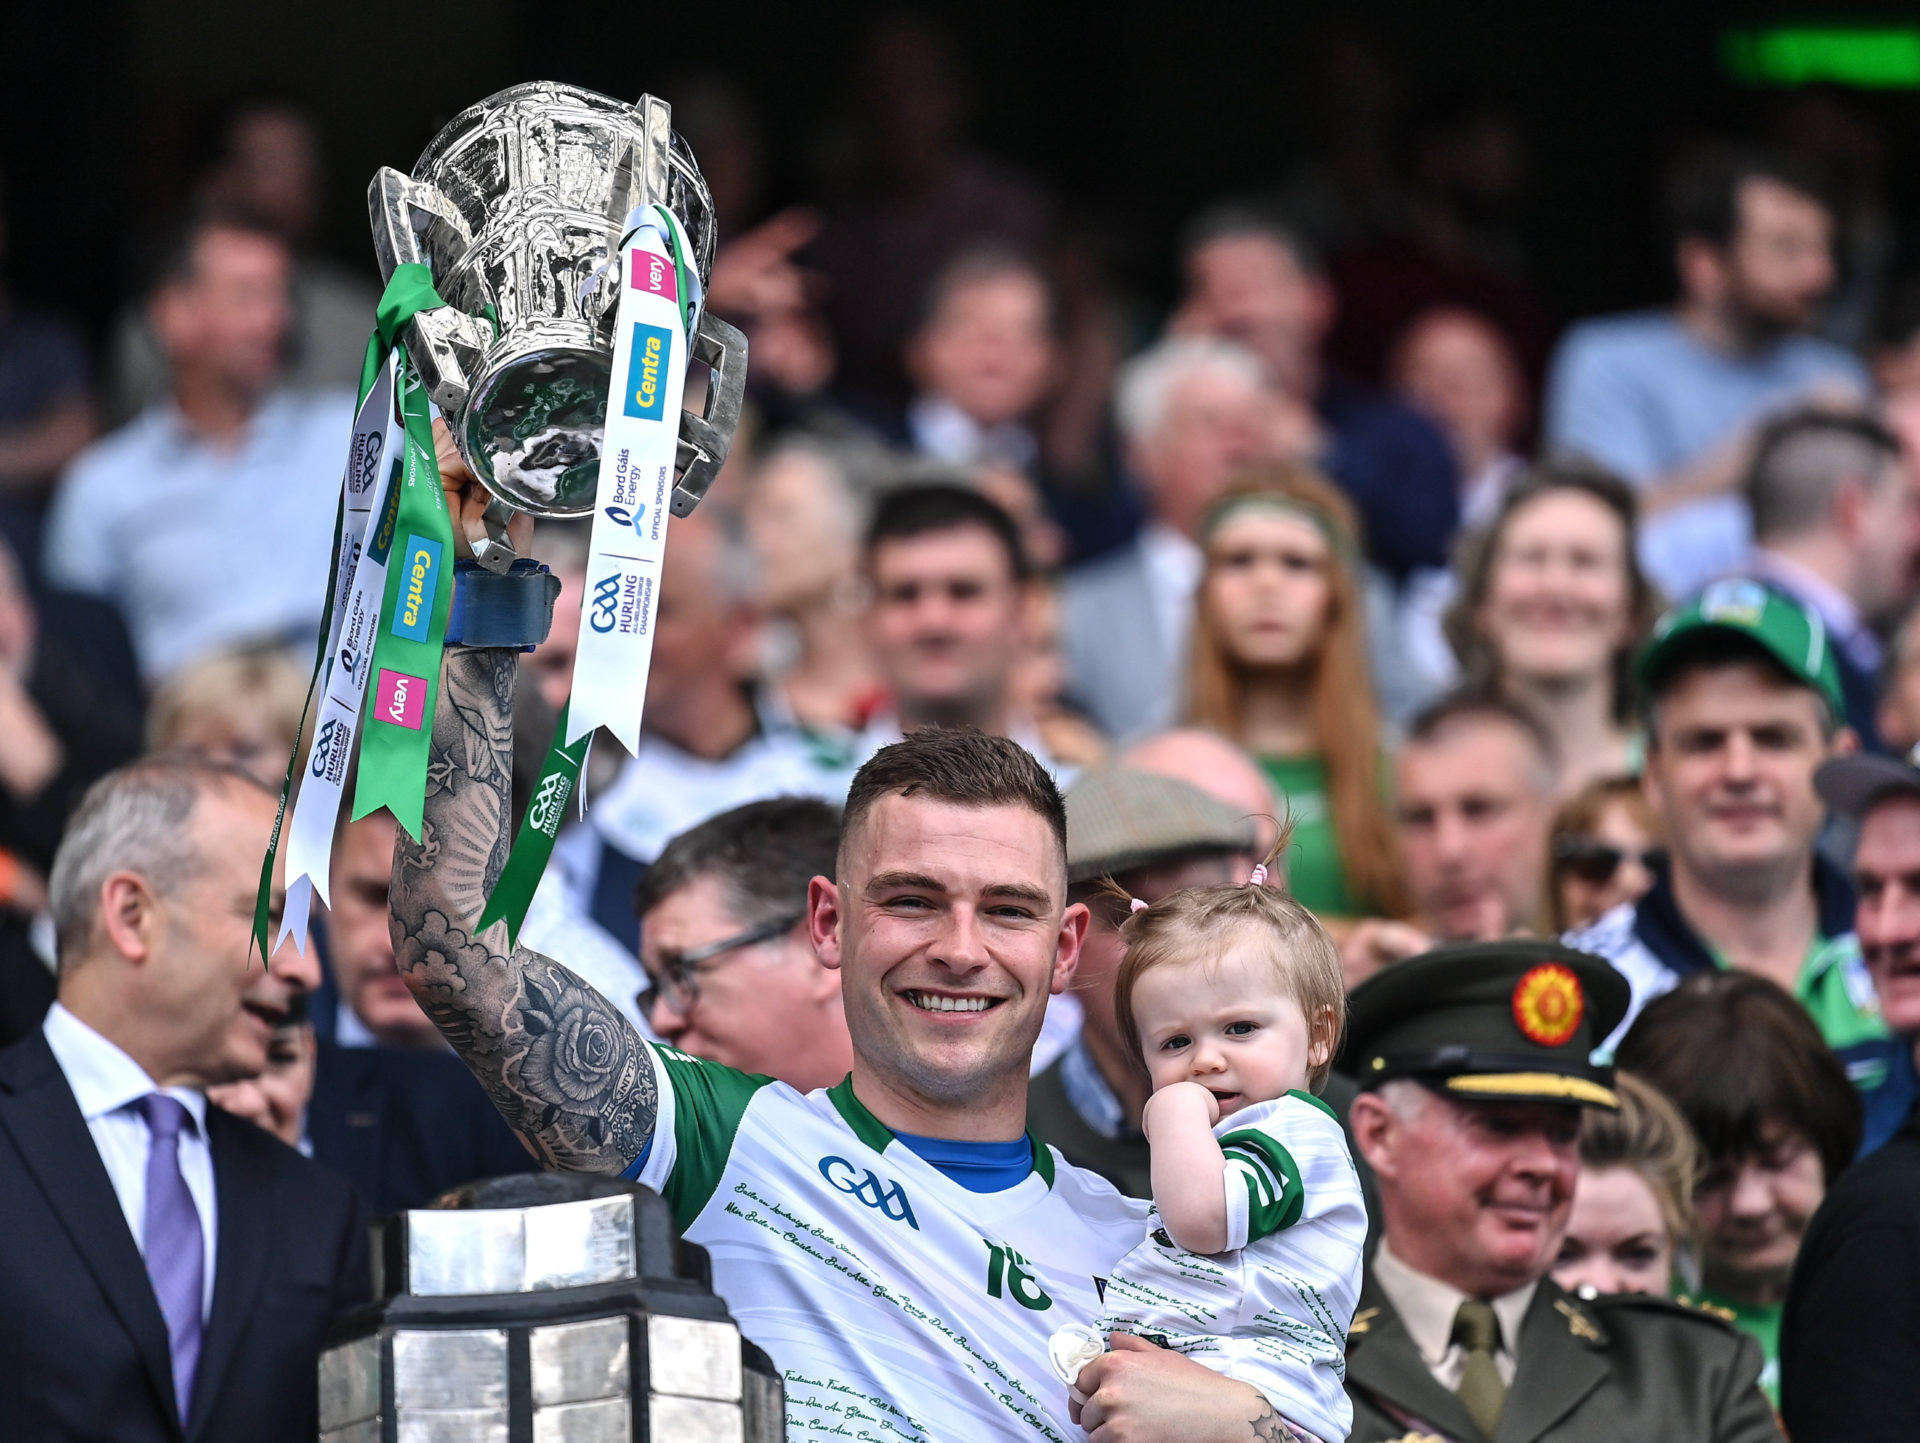 Limerick goalkeeper Barry Hennessy lifts the Liam MacCarthy Cup with his daughter after the All-Ireland Final, 17-07-2022. Image: Piaras Ó Mídheach/Sportsfile